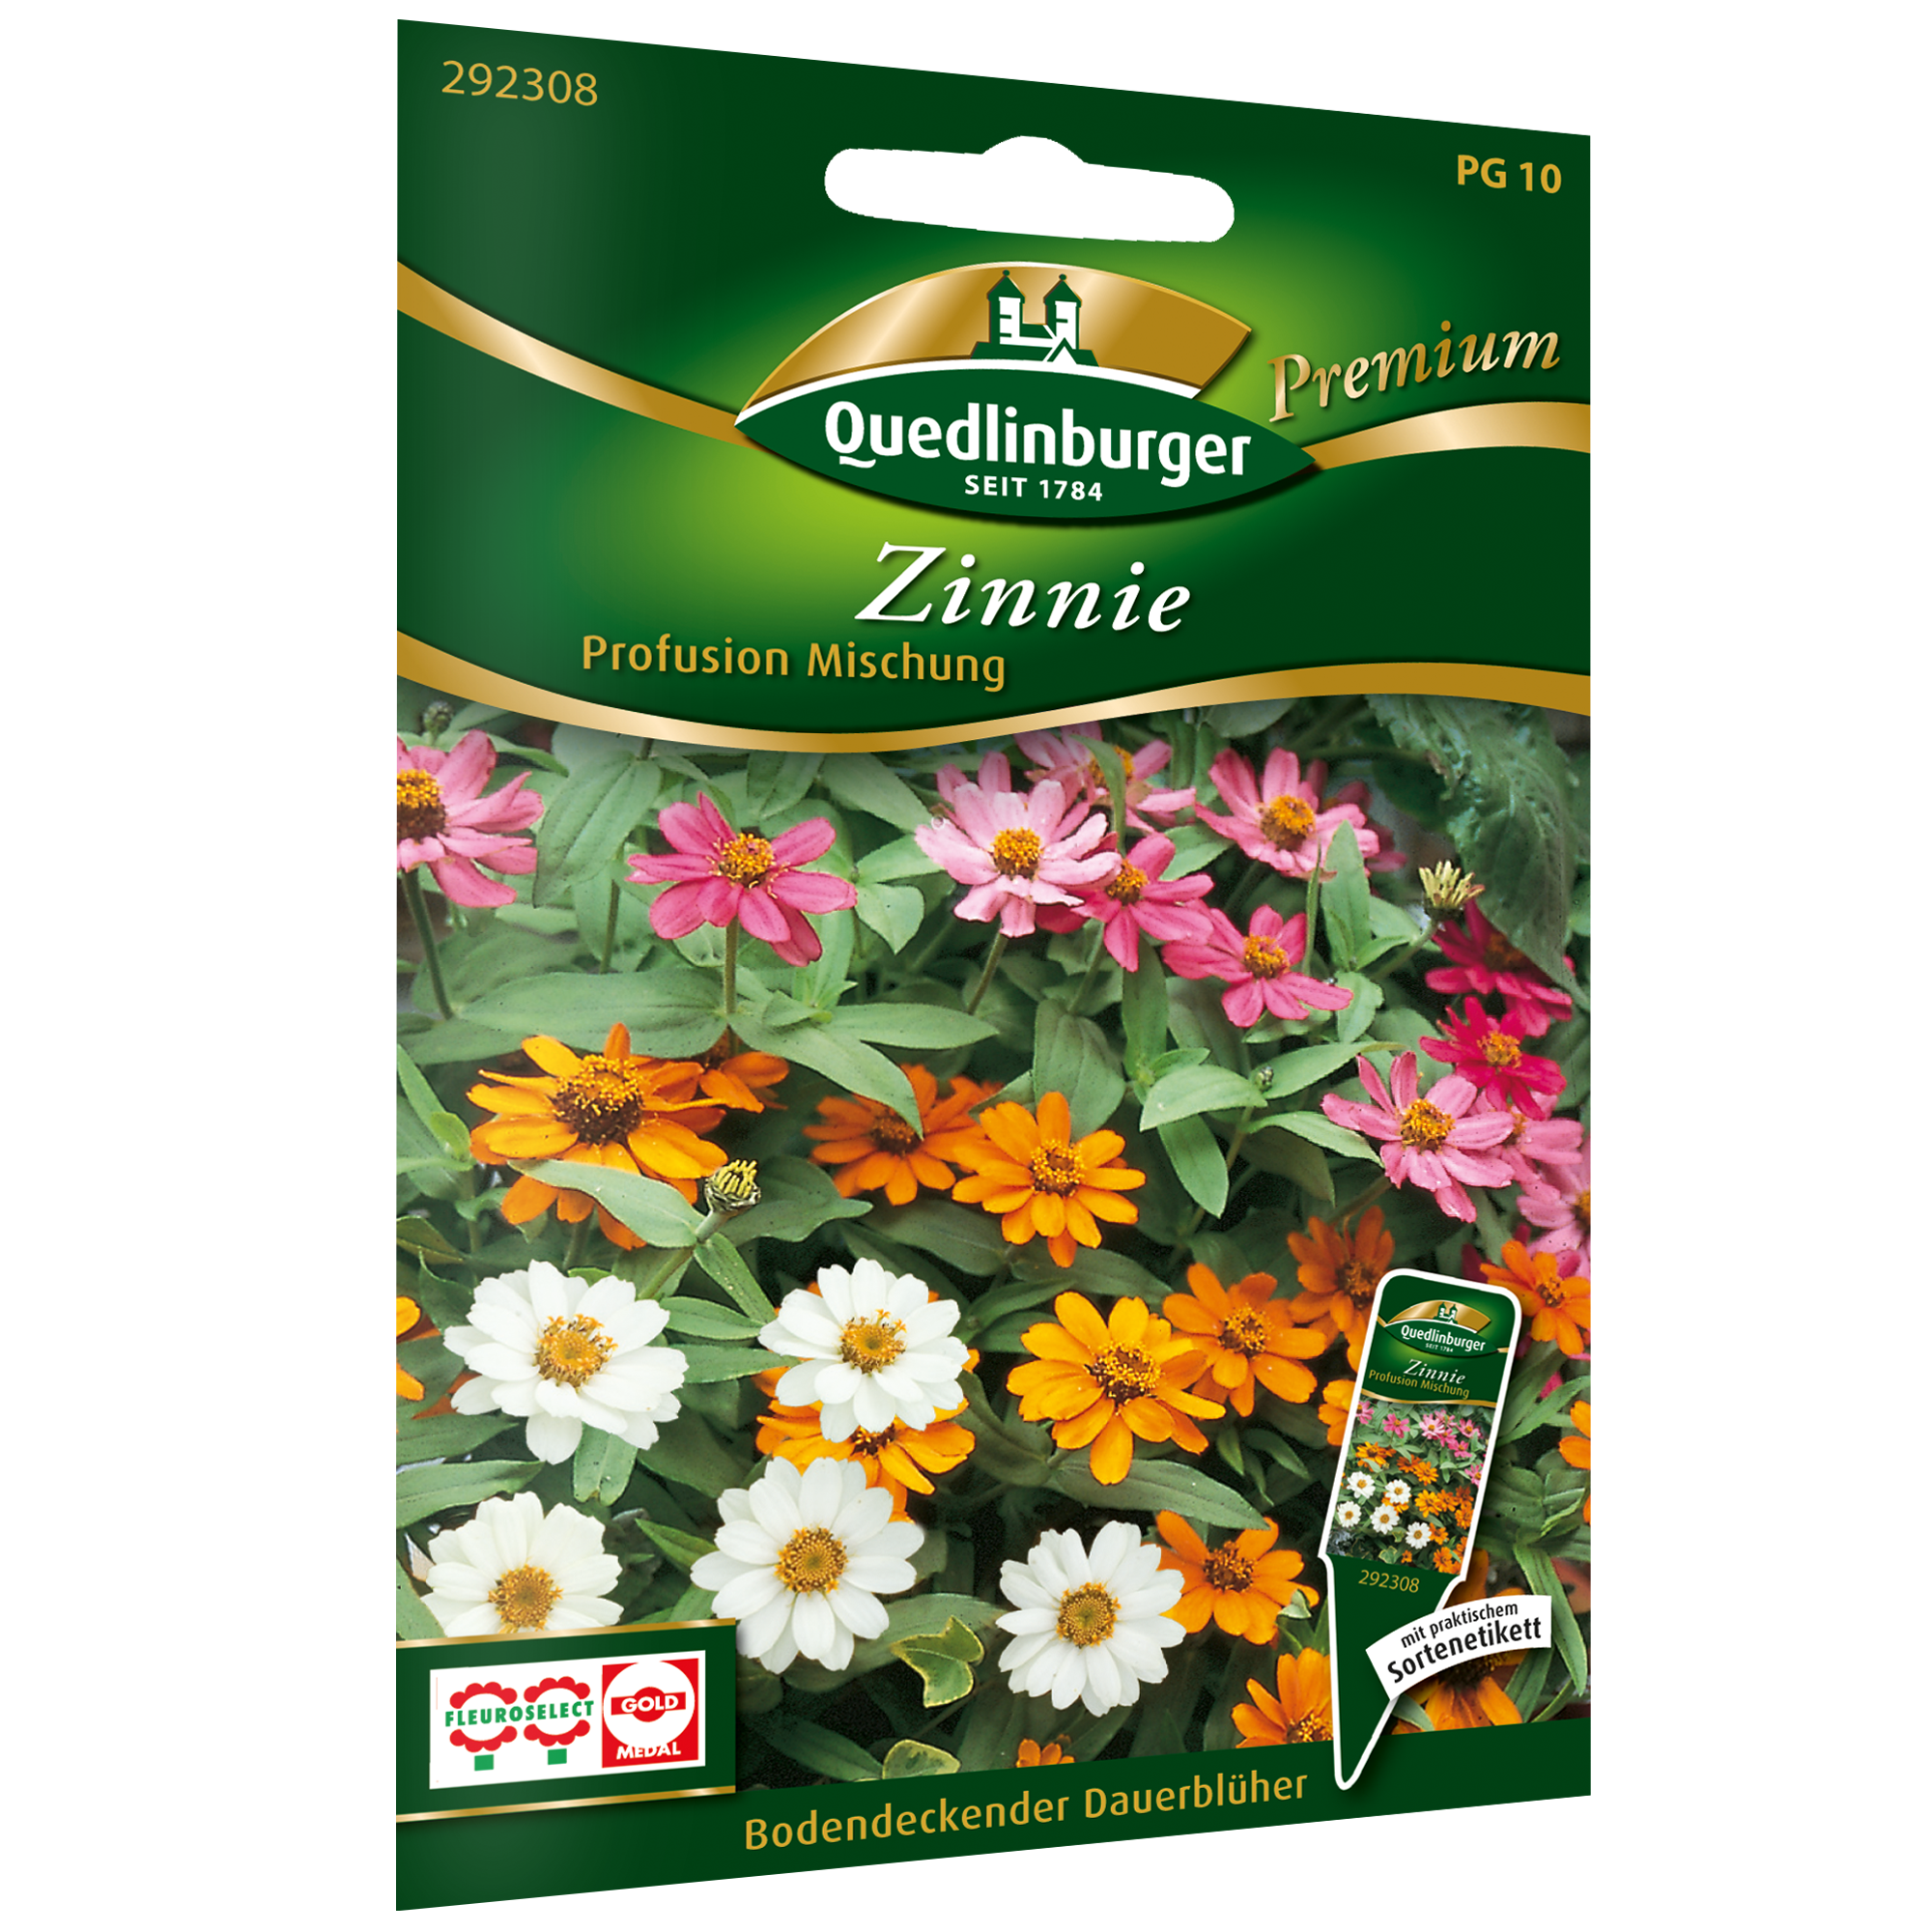 Zinnie 'Profusion' Mischung + product picture